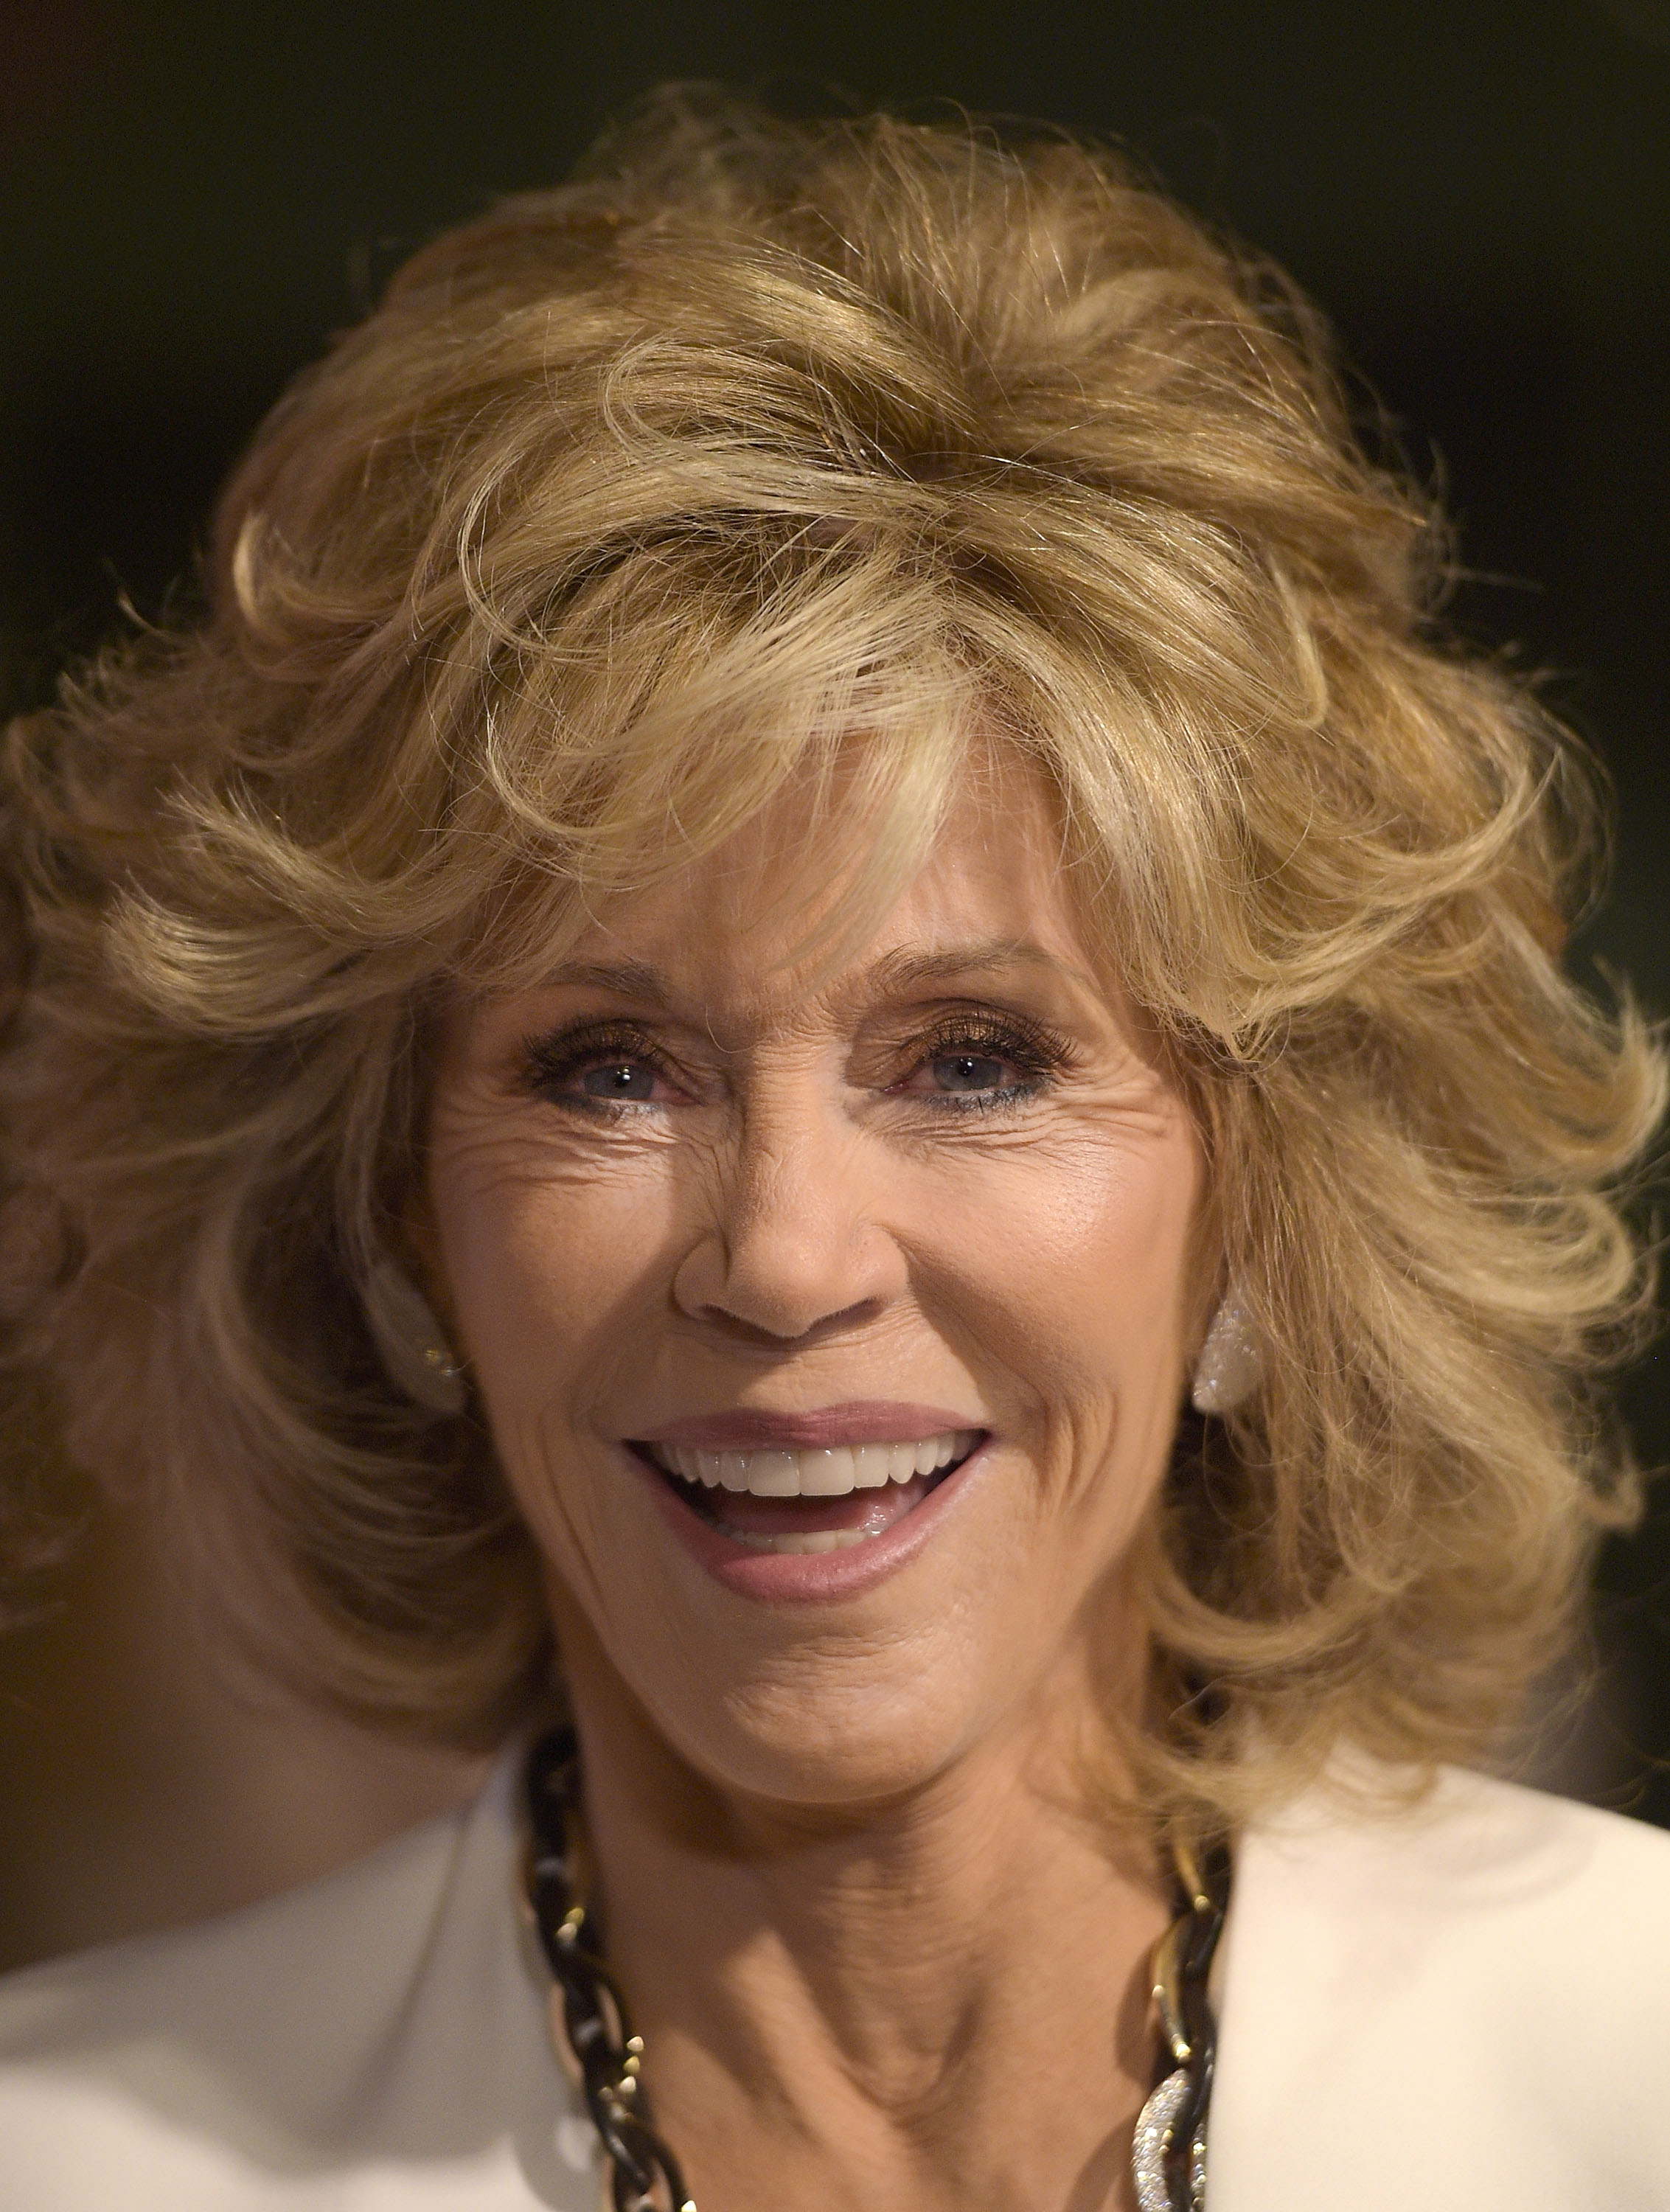 Jane Fonda attends Netflix's "Grace &amp; Frankie" Q&amp;A Screening Event at Pacific Design Center on May 26, 2015 in West Hollywood, California. (Jason Kempin—Getty Images)